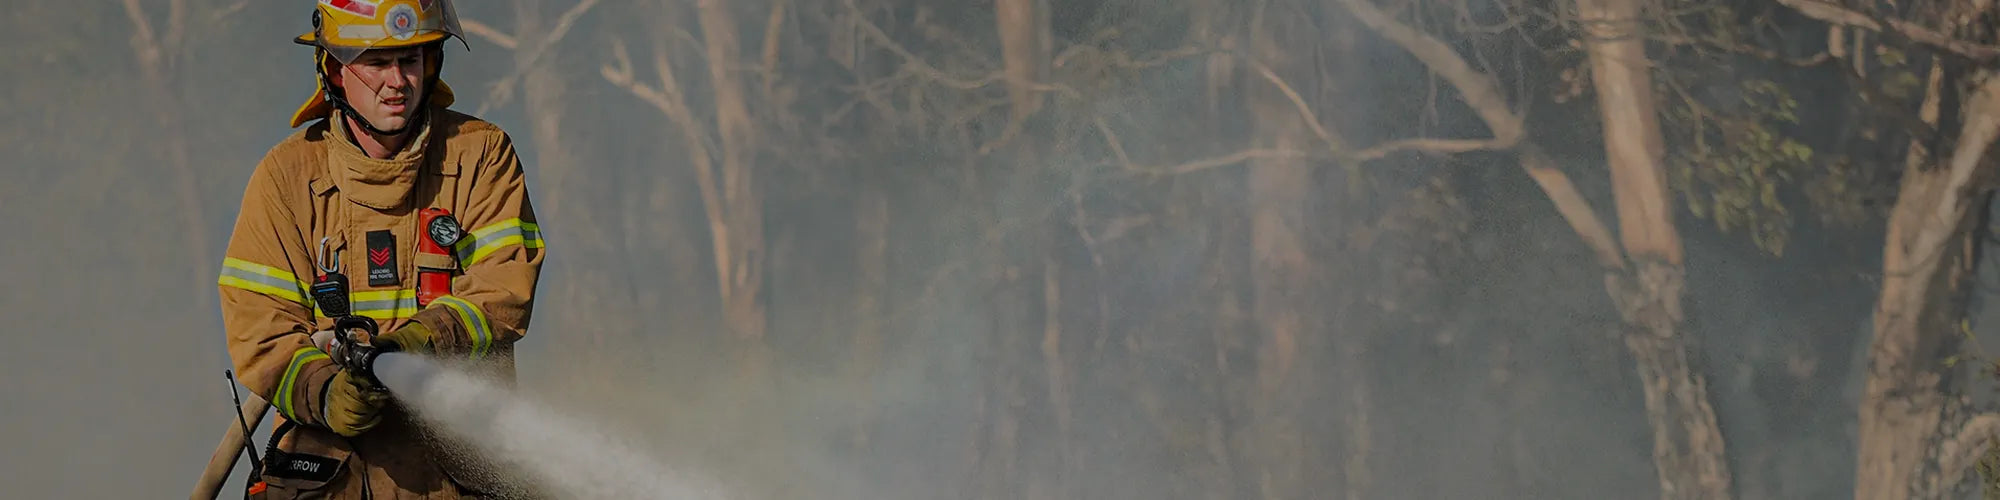 Firefighter with a hose in the forest.